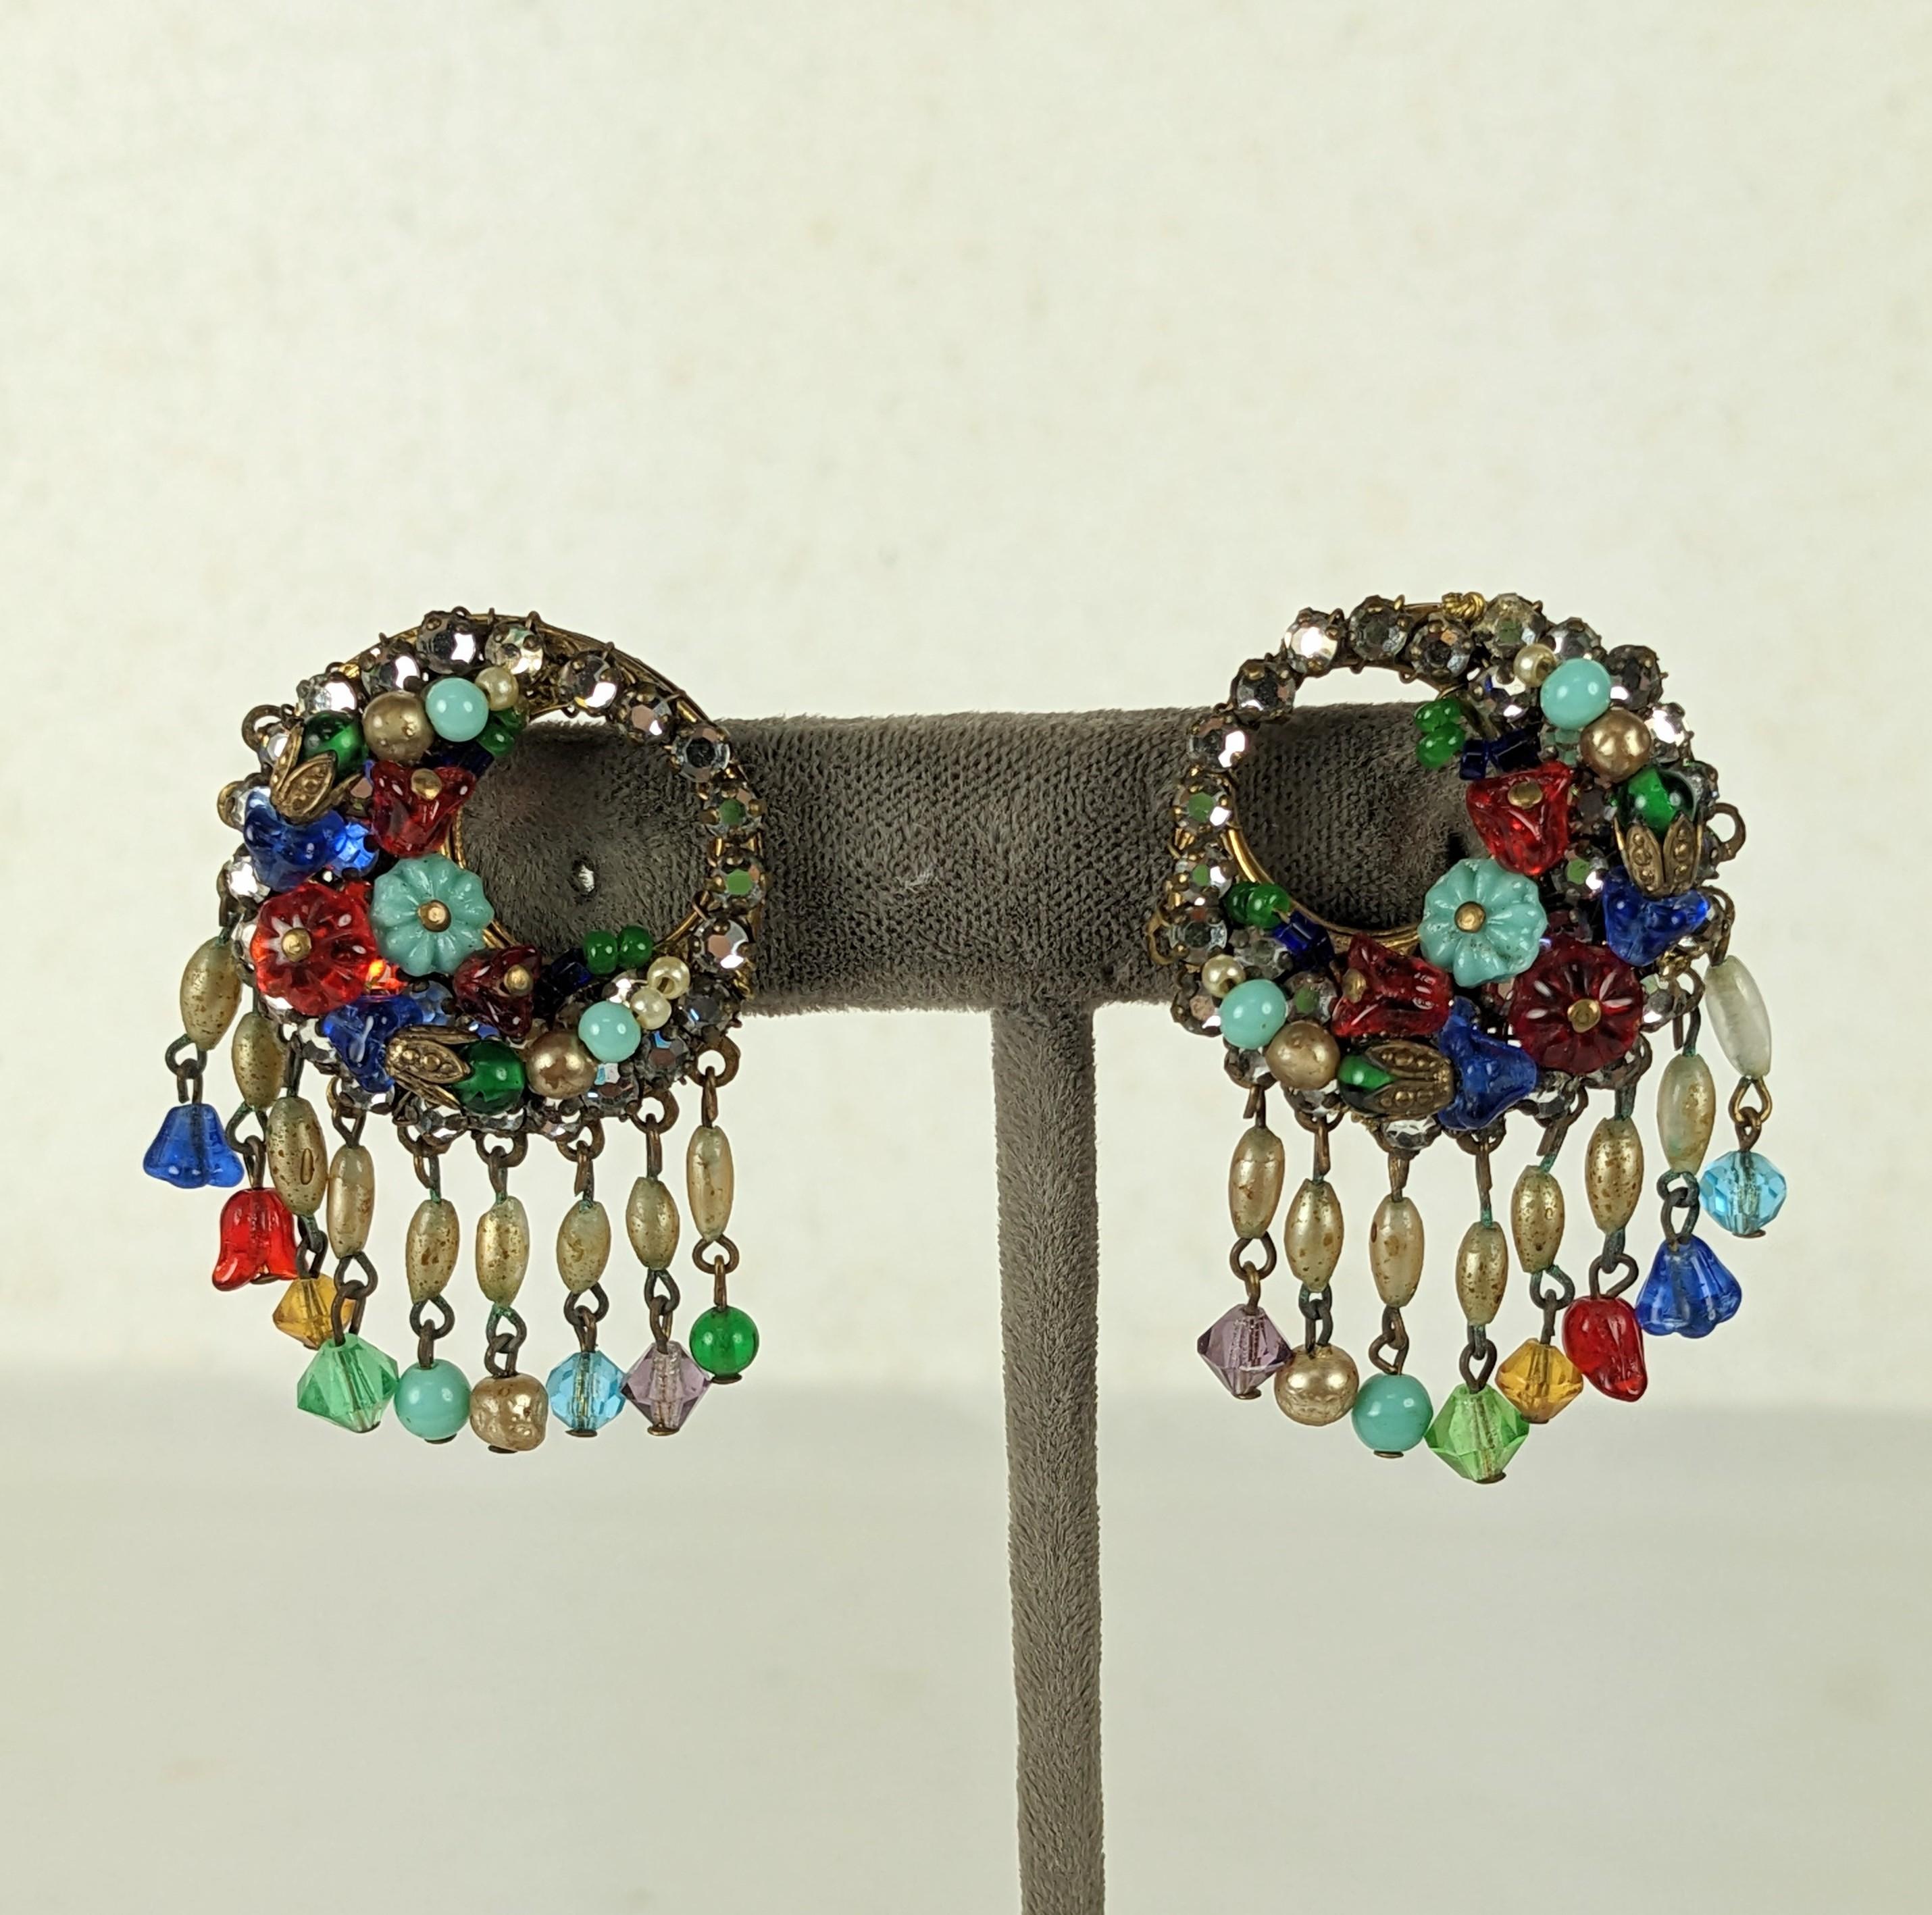 Charming Eugene Pave and Pate de Verre Flower Earrings from the 1940's. Hand sewn crystals with tiny glass flowers and faux pearls. Clip back fittings. 1940's USA. 
1